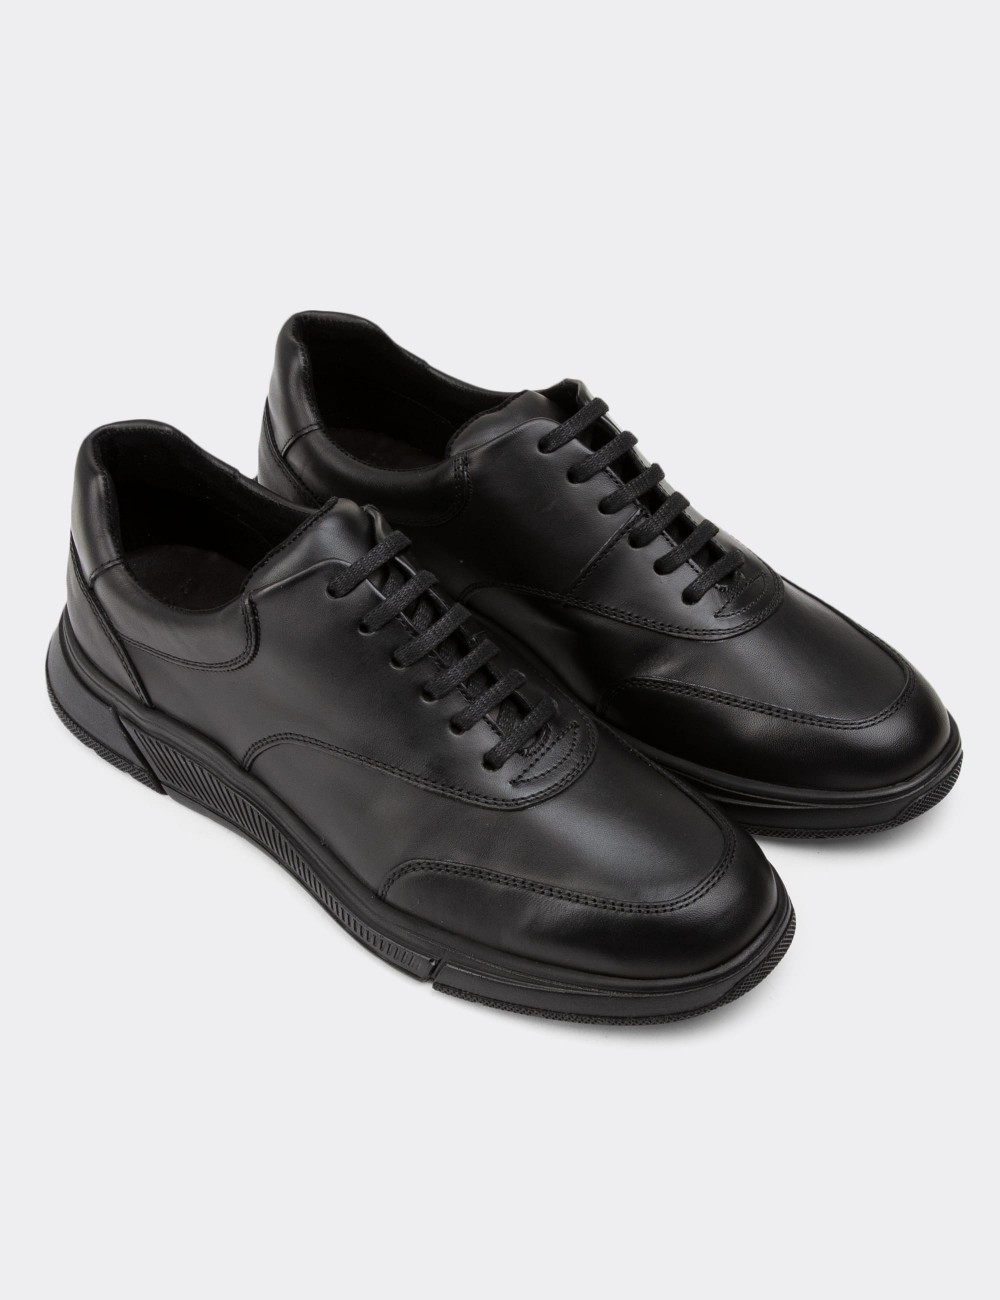 Black Leather Lace-up Shoes - 01871MSYHC01